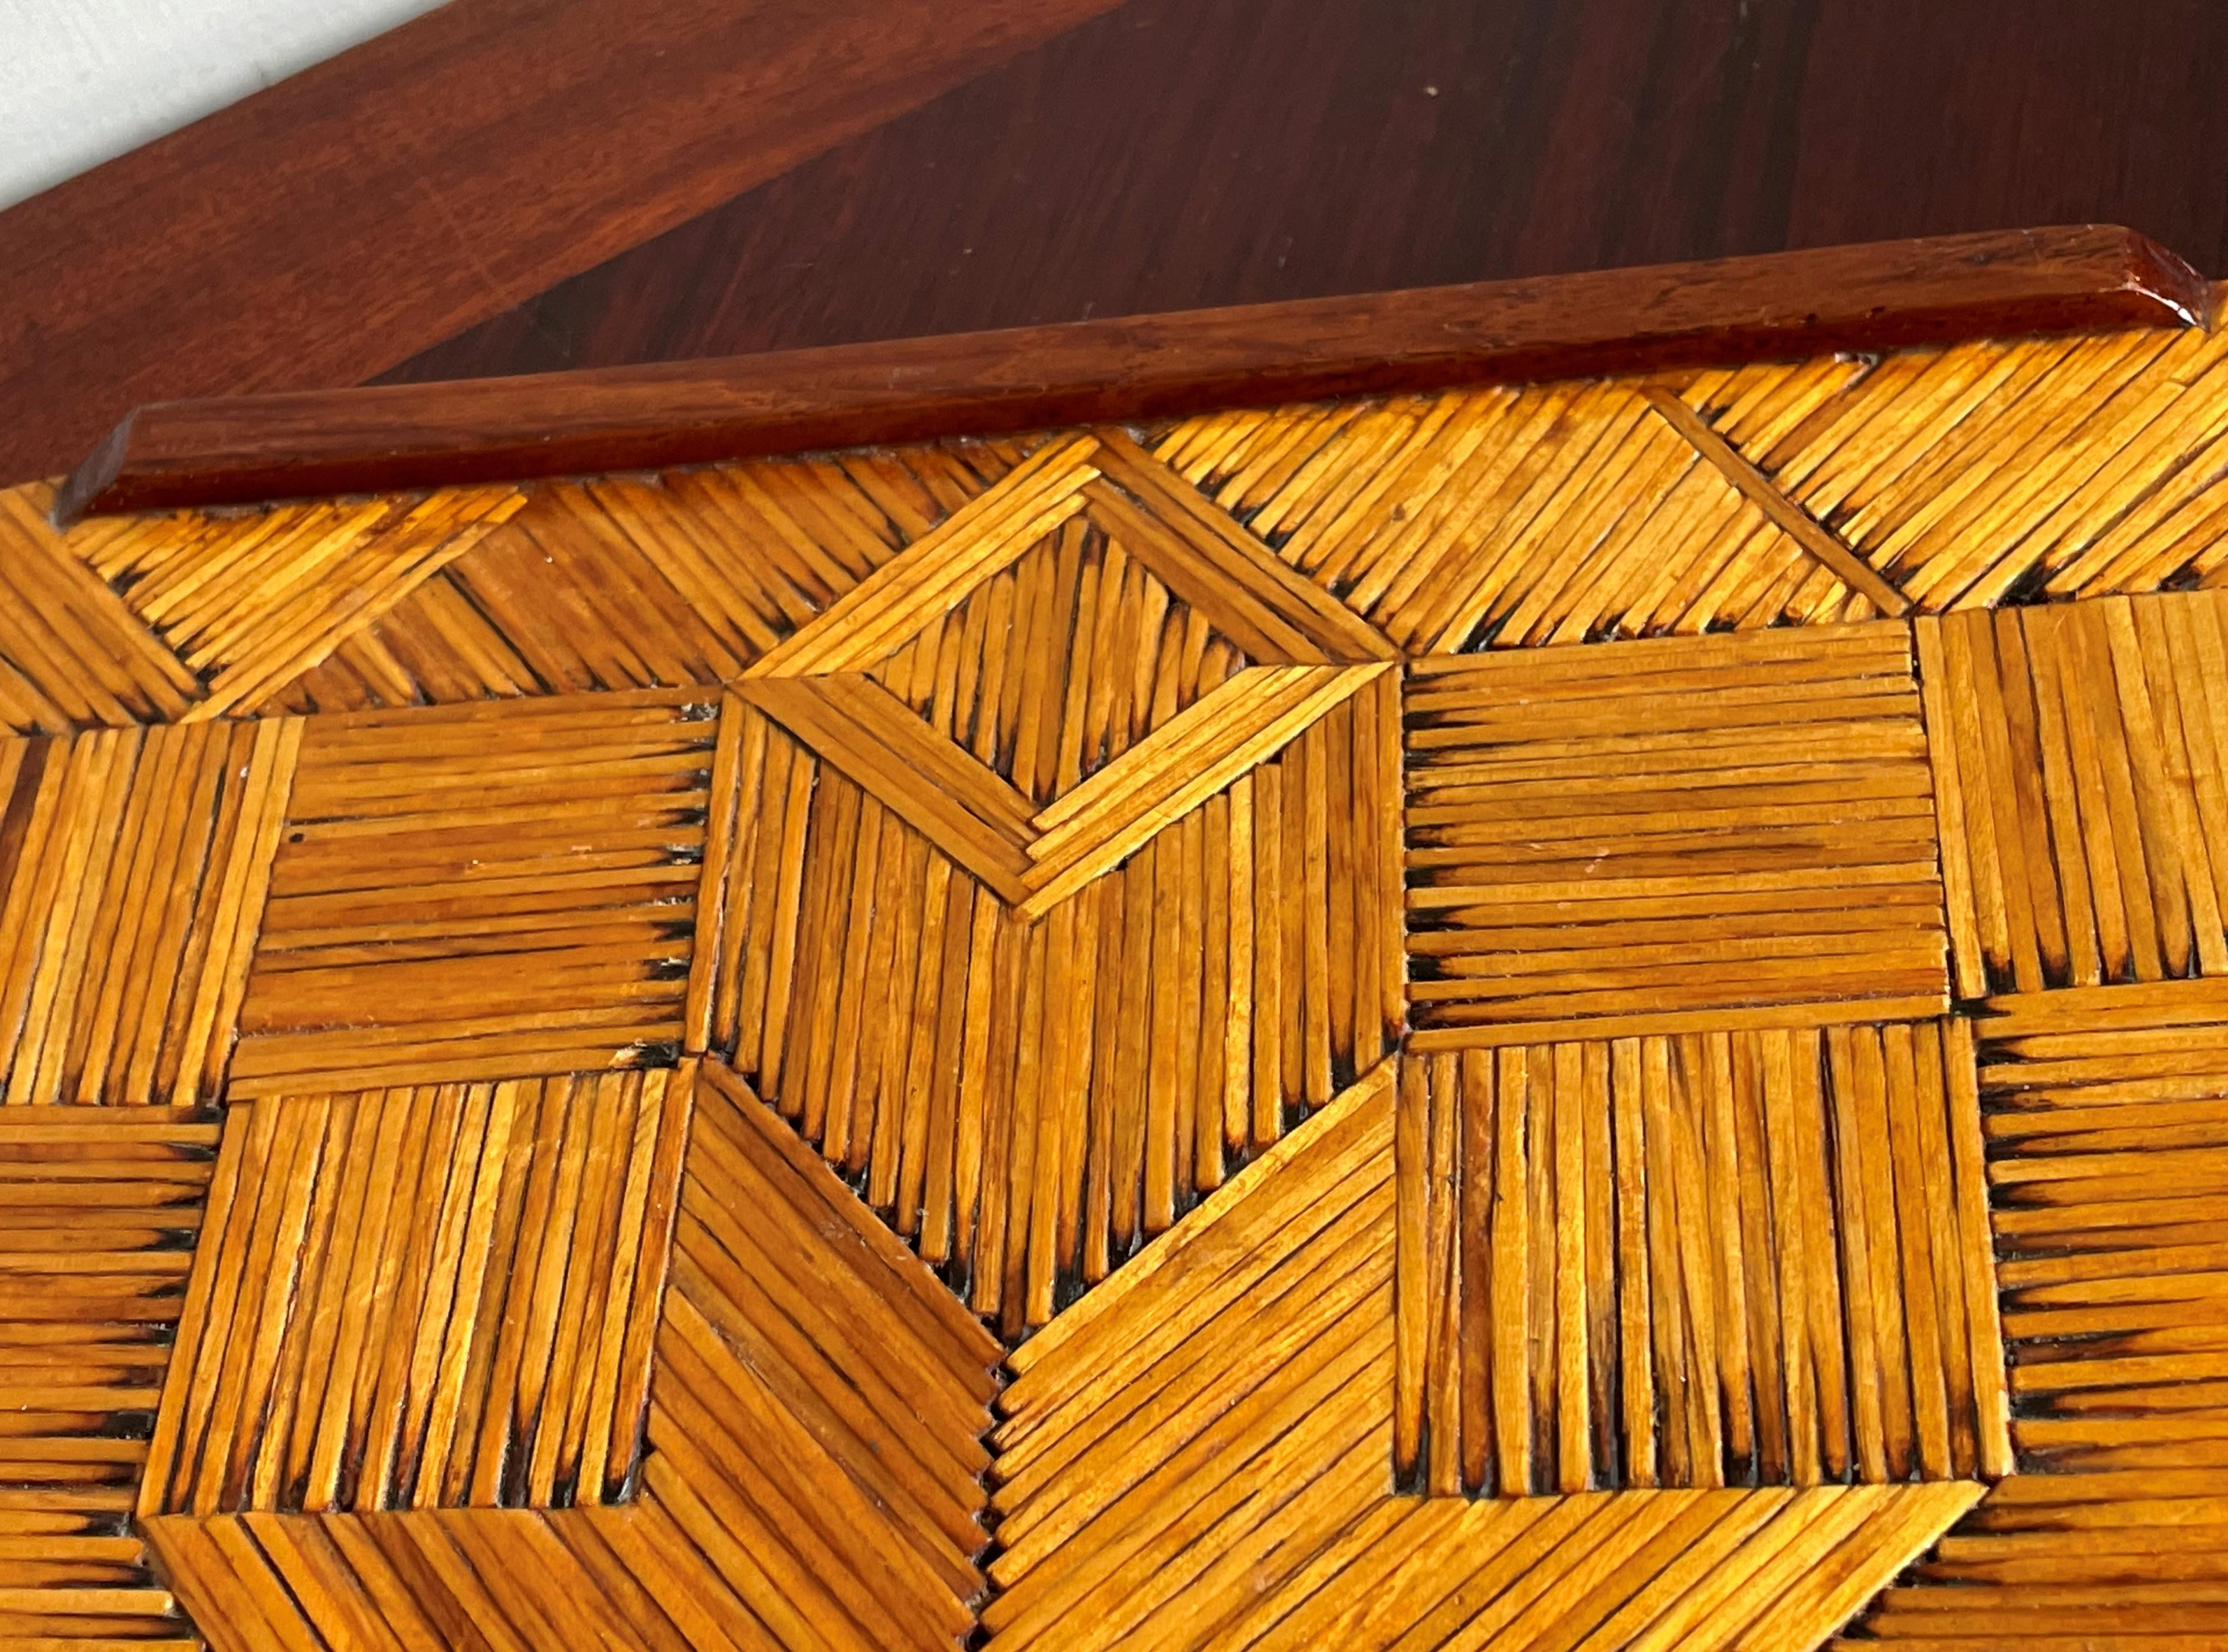 Midcentury Folk Art Serving Tray, Handmade of Burnt Matches in Parquetry Pattern For Sale 1